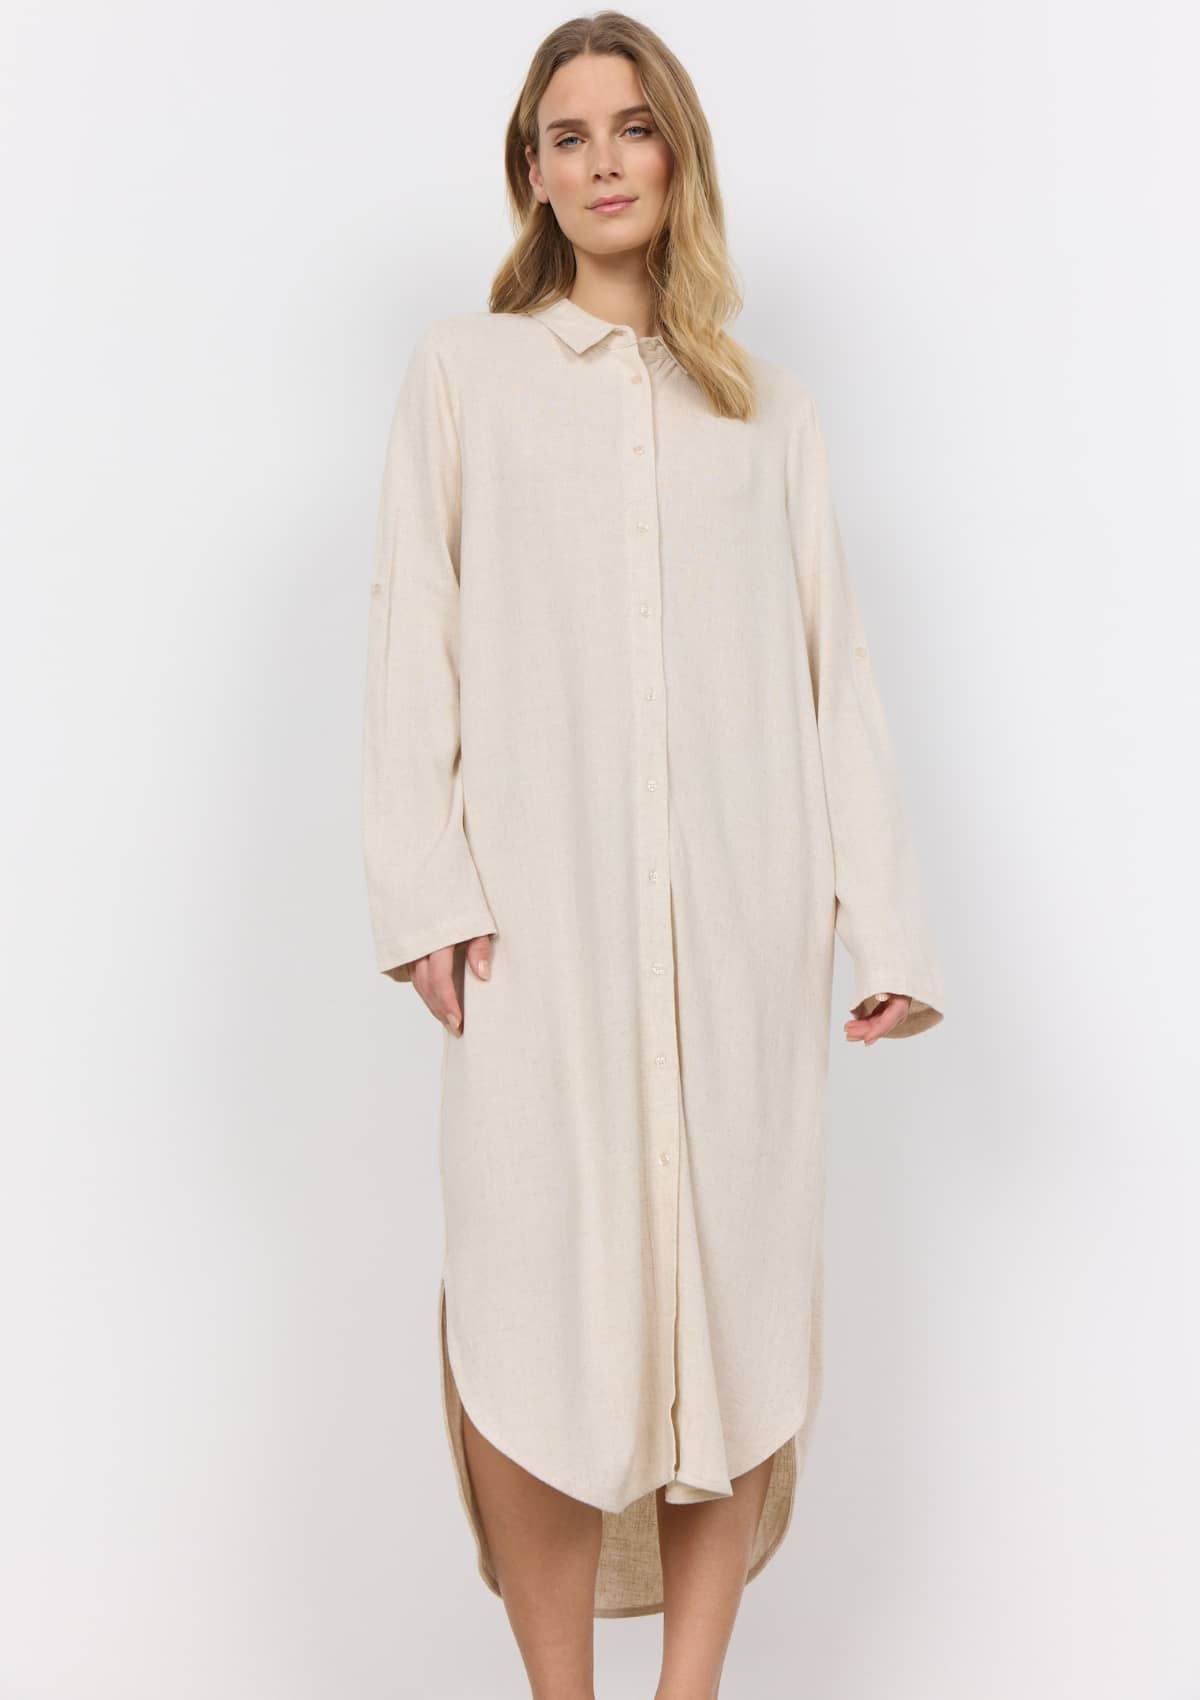 Long button up collared long sleeve dress.